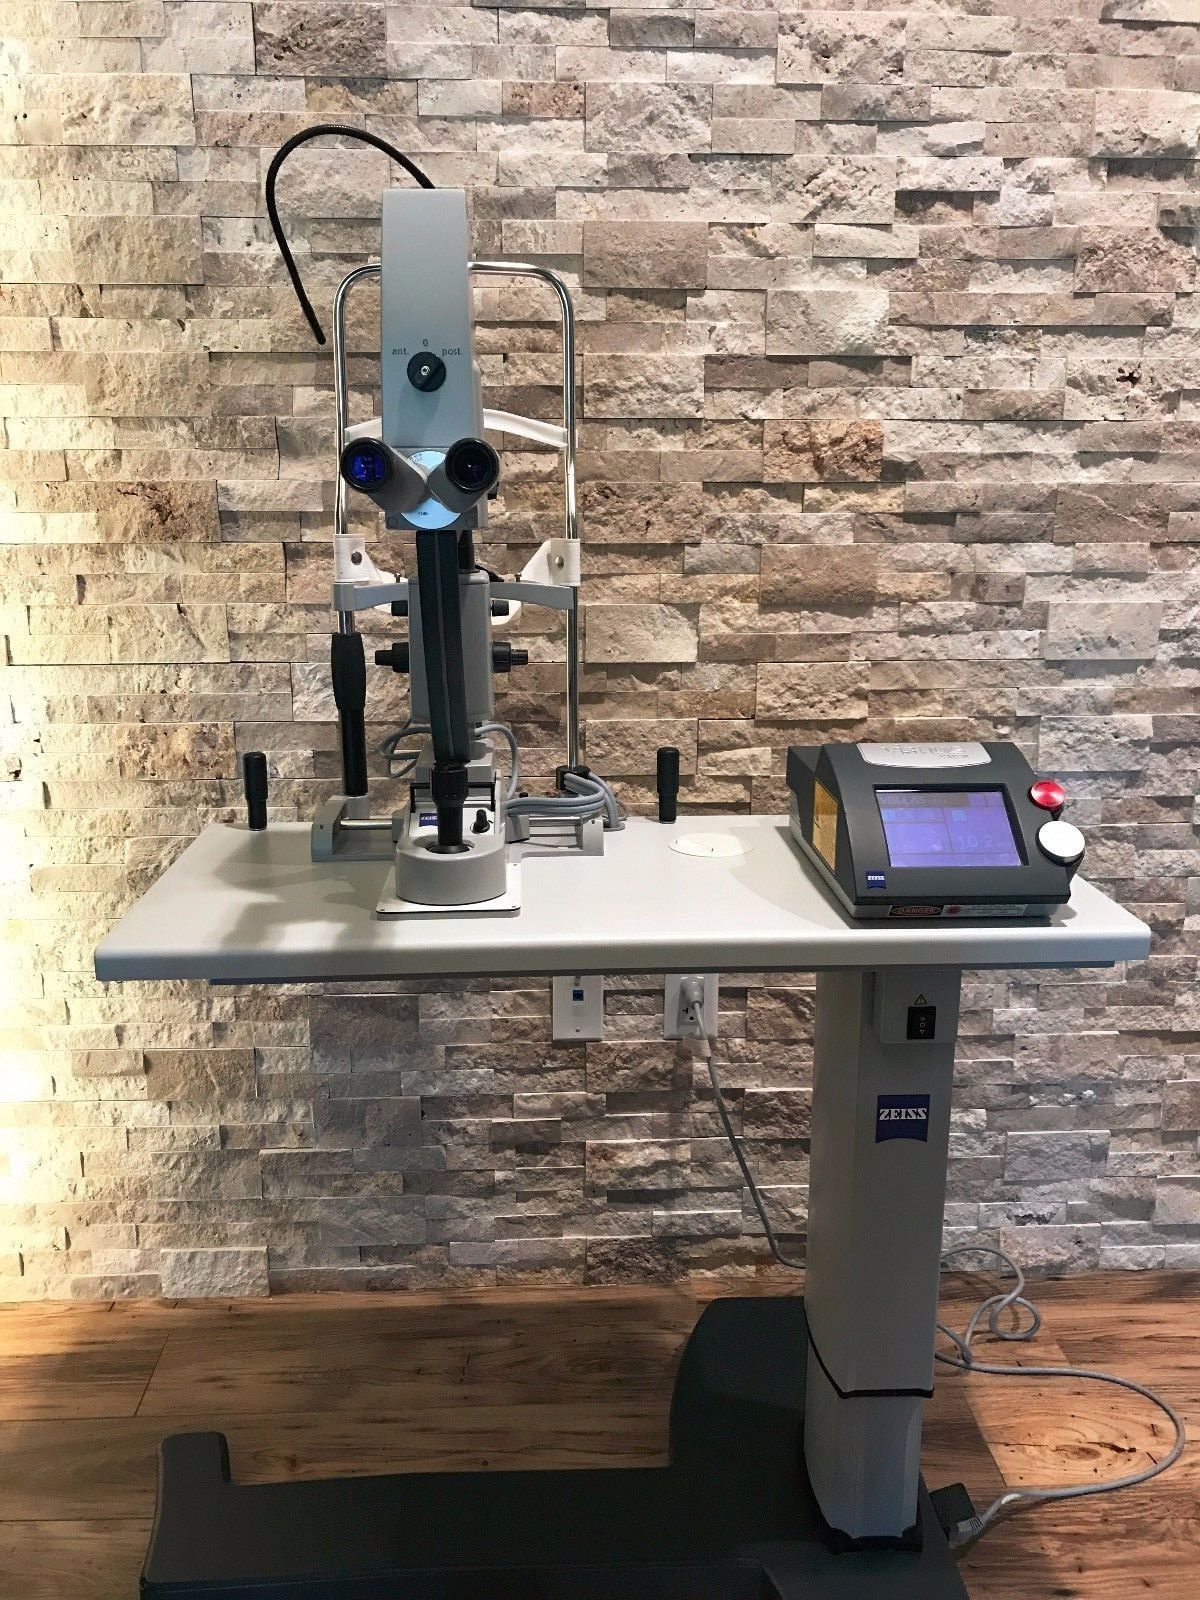 Zeiss Visulas Yag 3 Zeiss 30SL M Slit Lamp with power table